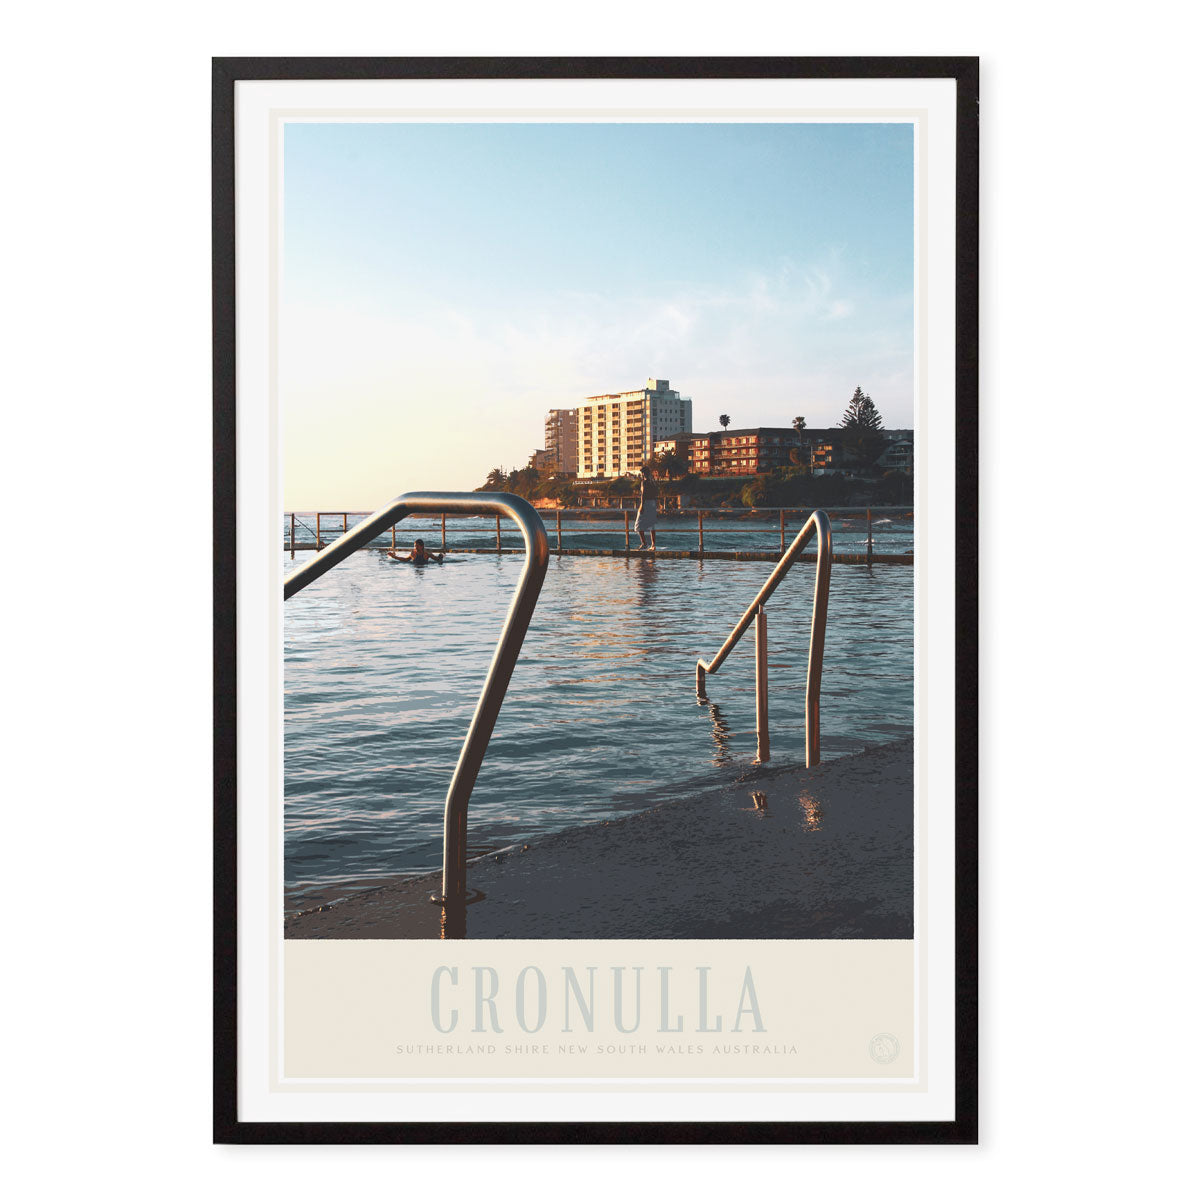 Cronulla Beach Pool vintage retro travel poster print in black frame by Places We Luv